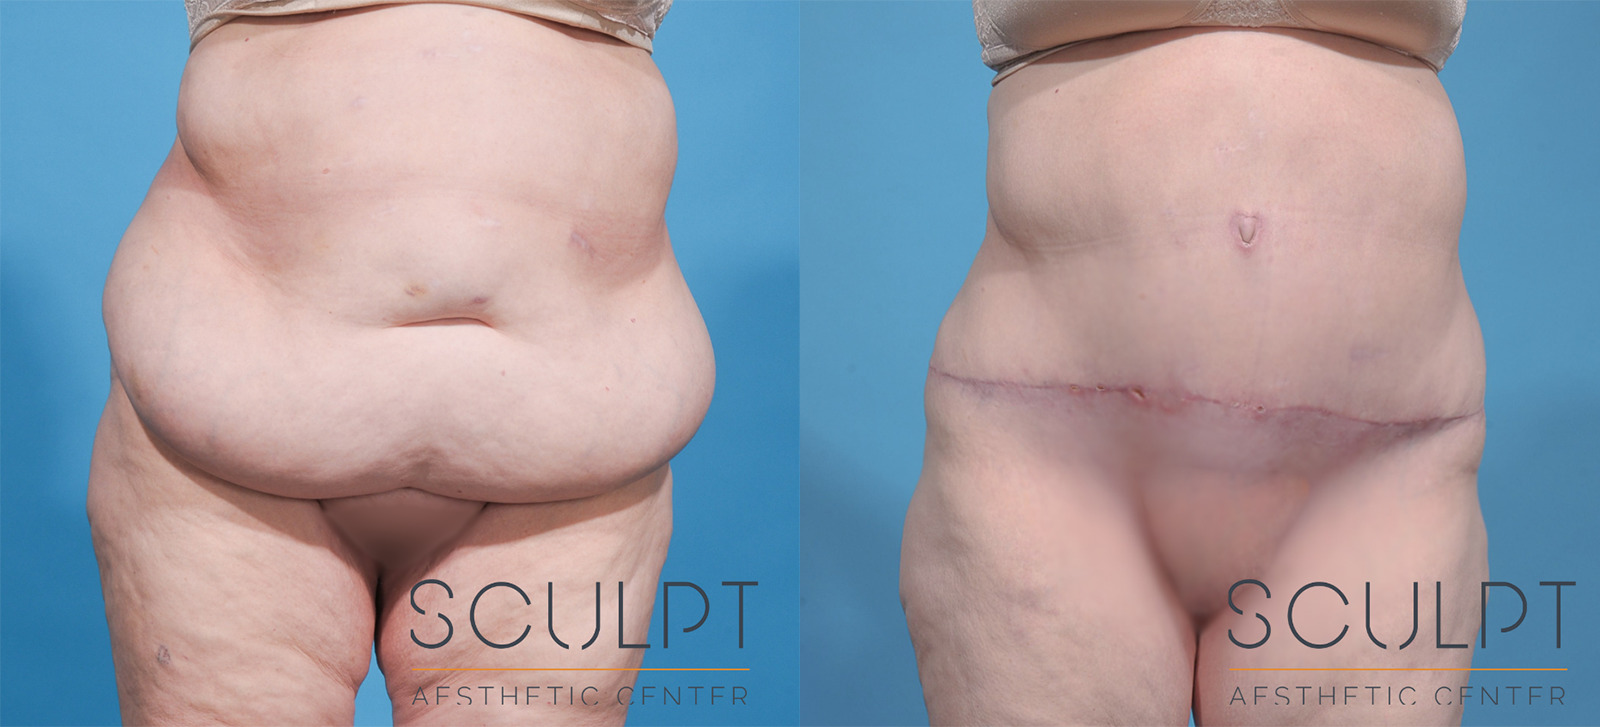 After Weight Loss Before and After Photo by Sculpt Aesthetic Center in Frisco, TX